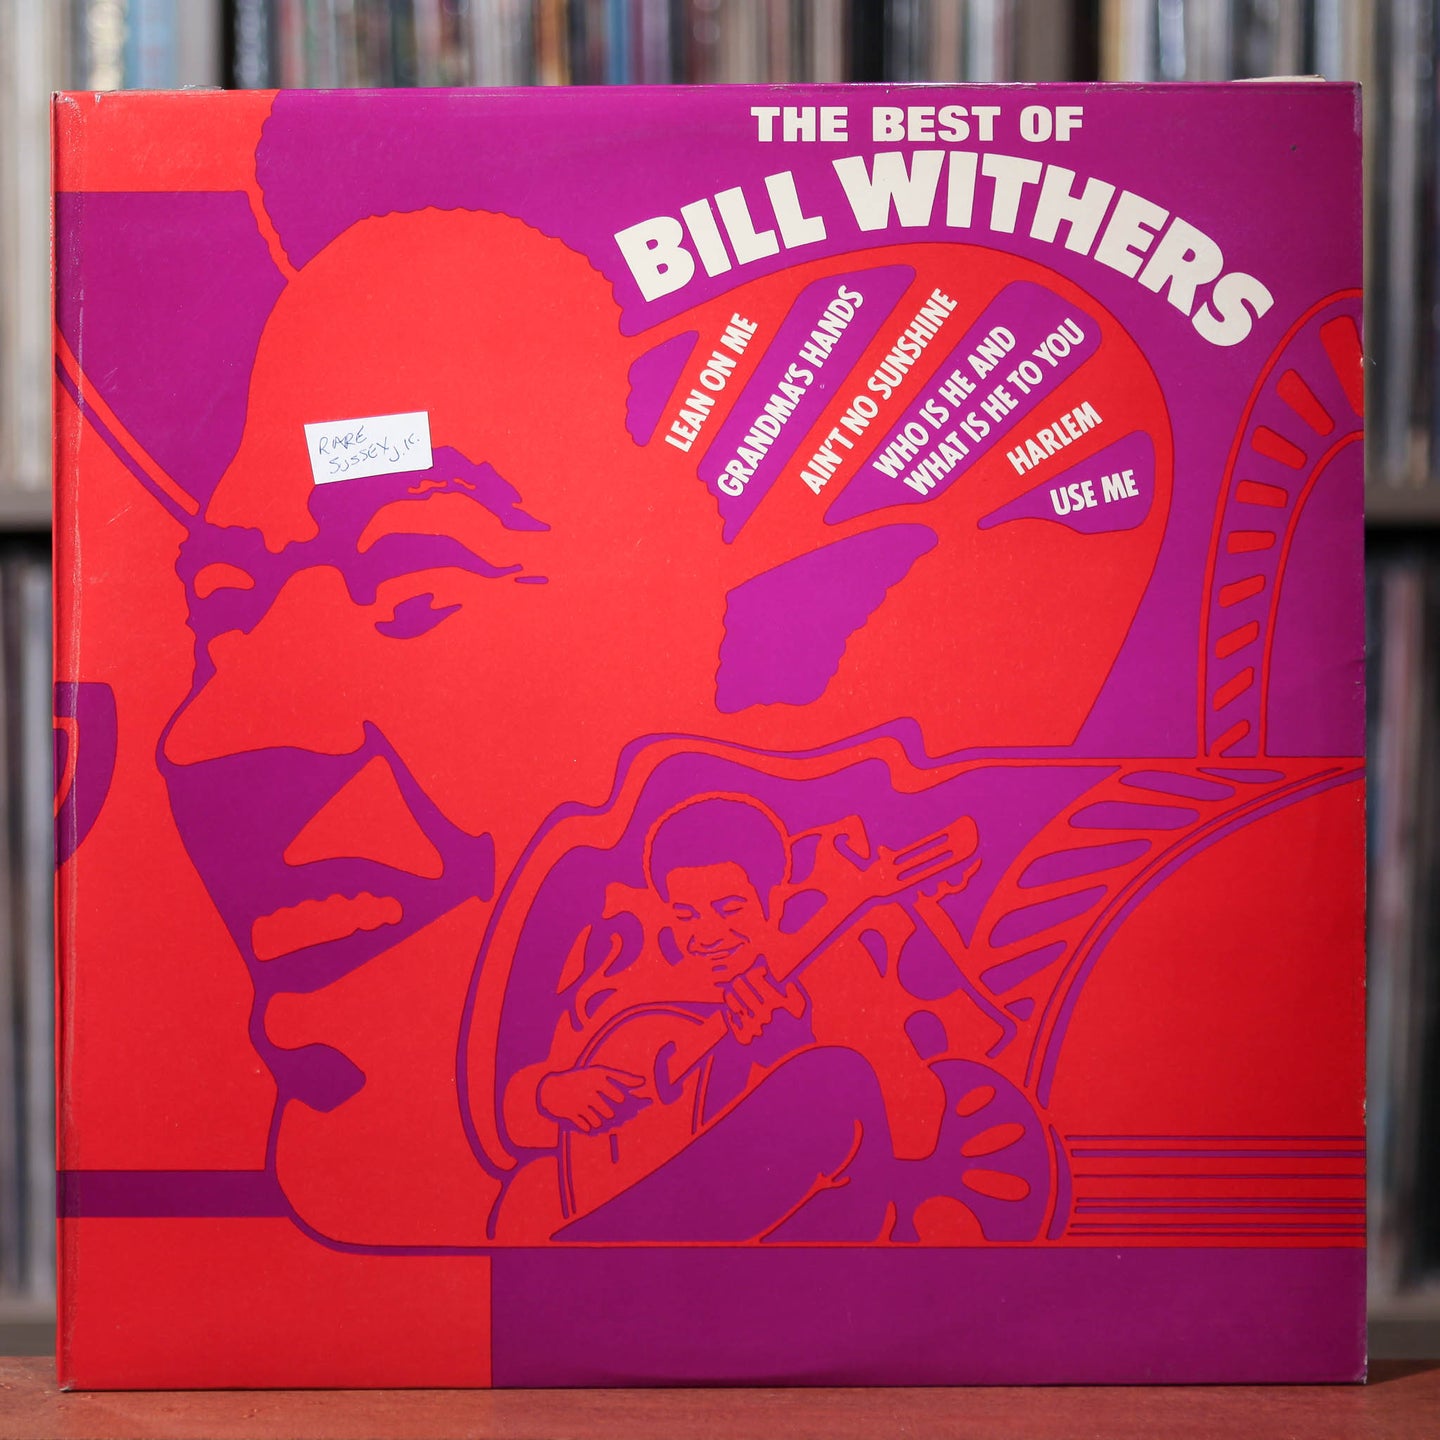 Bill Withers - The Best Of Bill Withers - UK Import - 1975 Sussex, VG+/EX